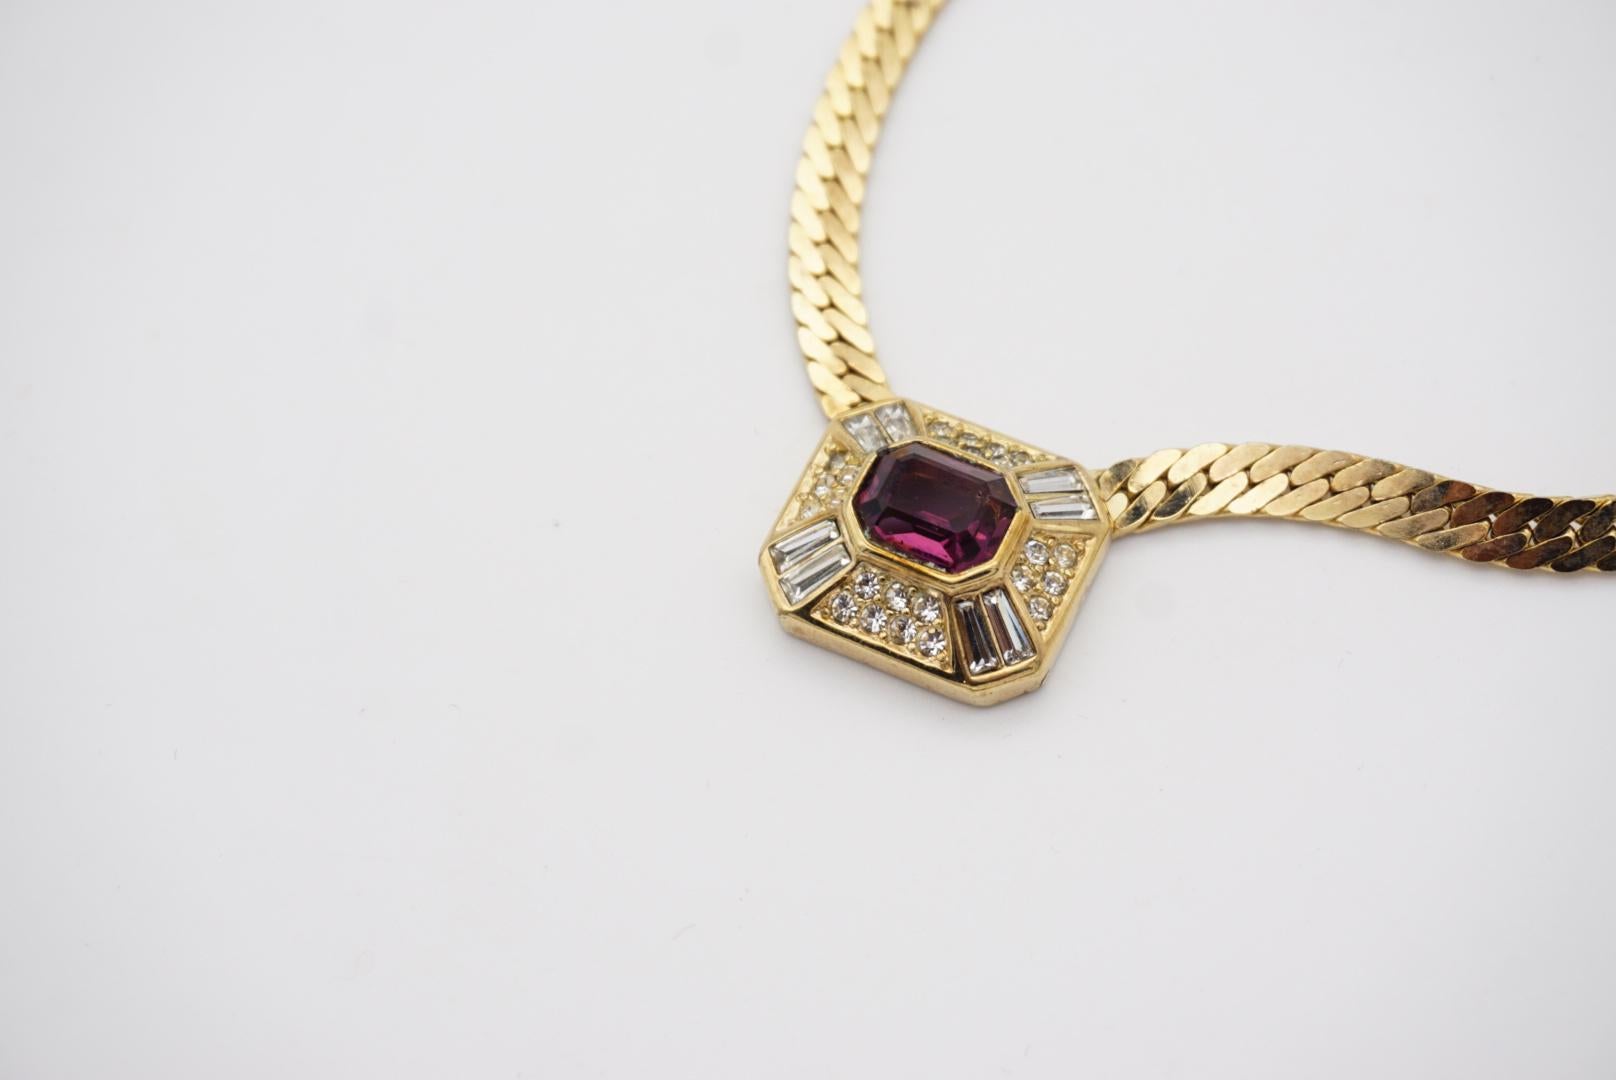 Christian Dior Vintage 1980s Rectangle Amethyst Purple Crystal Pendant Necklace In Excellent Condition For Sale In Wokingham, England